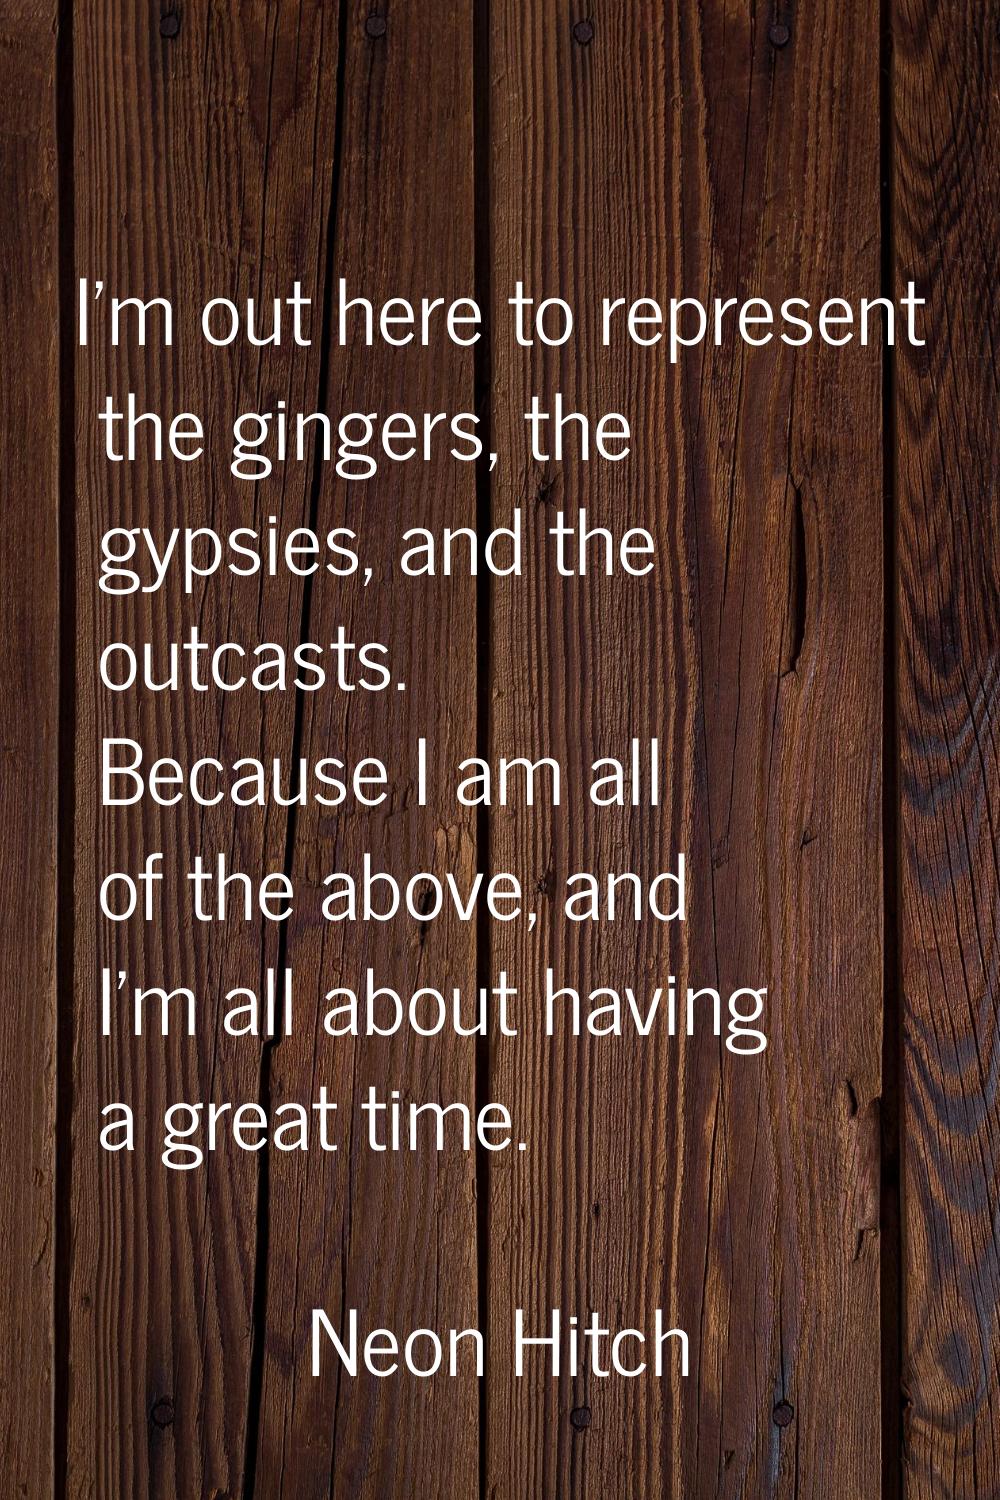 I'm out here to represent the gingers, the gypsies, and the outcasts. Because I am all of the above